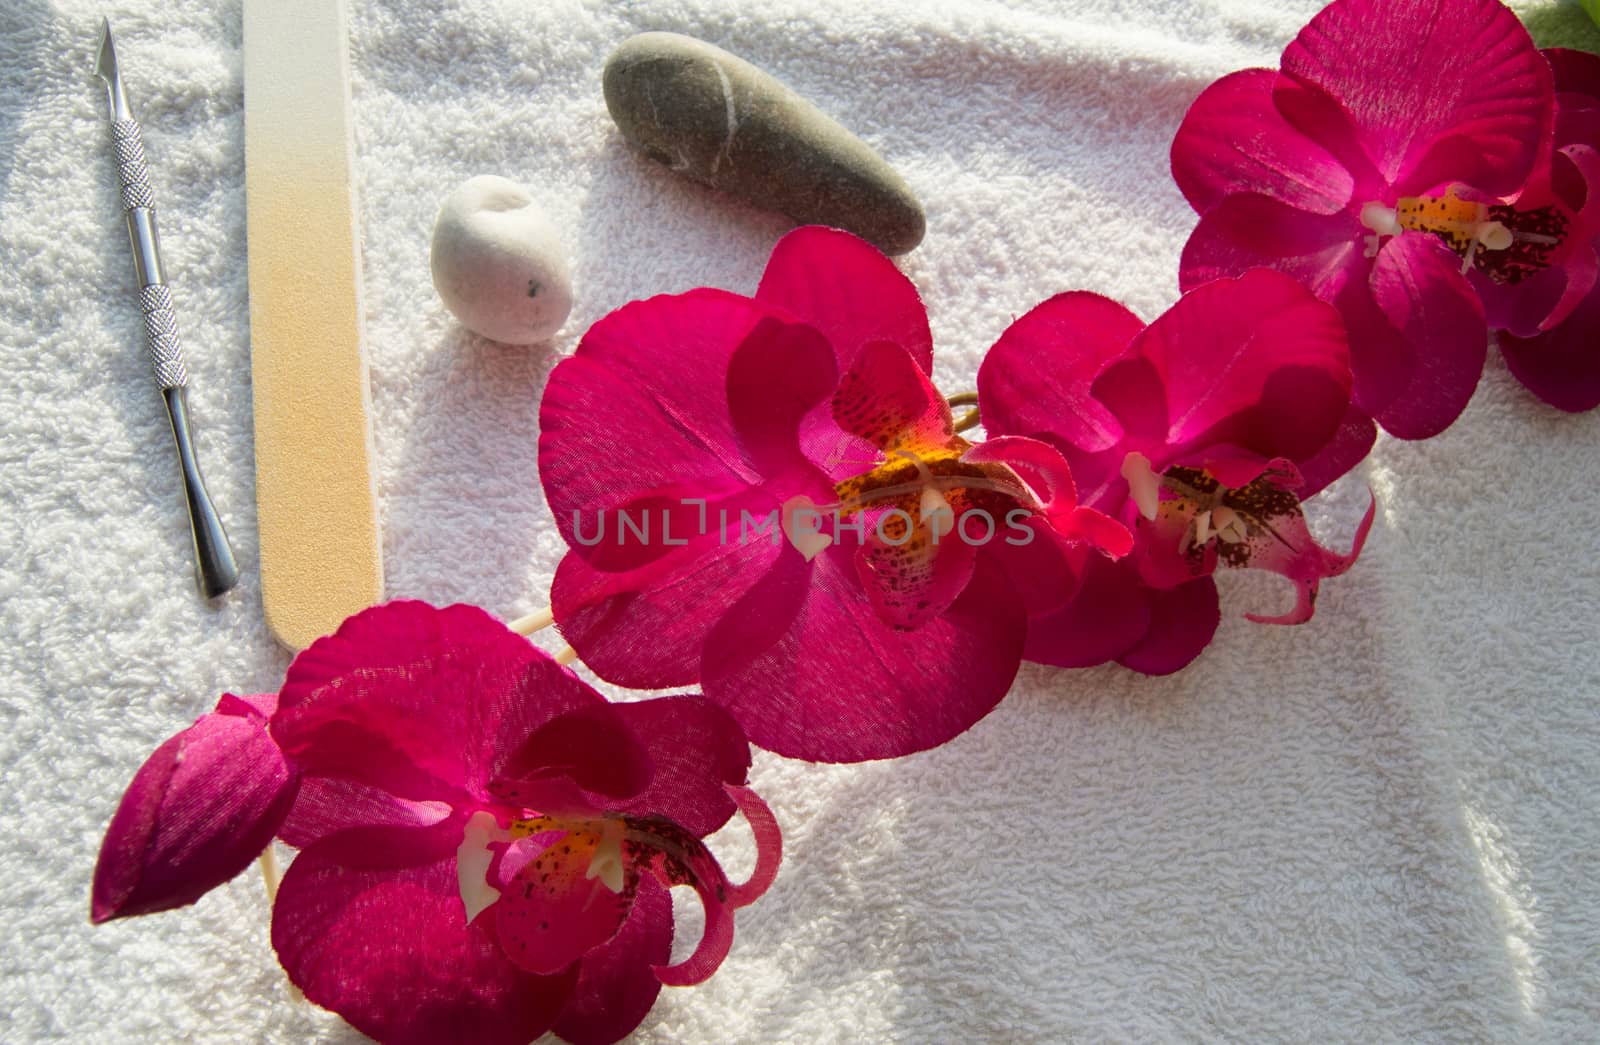 Accessories and tools for Spa manicure, Orchid and stones on white background.